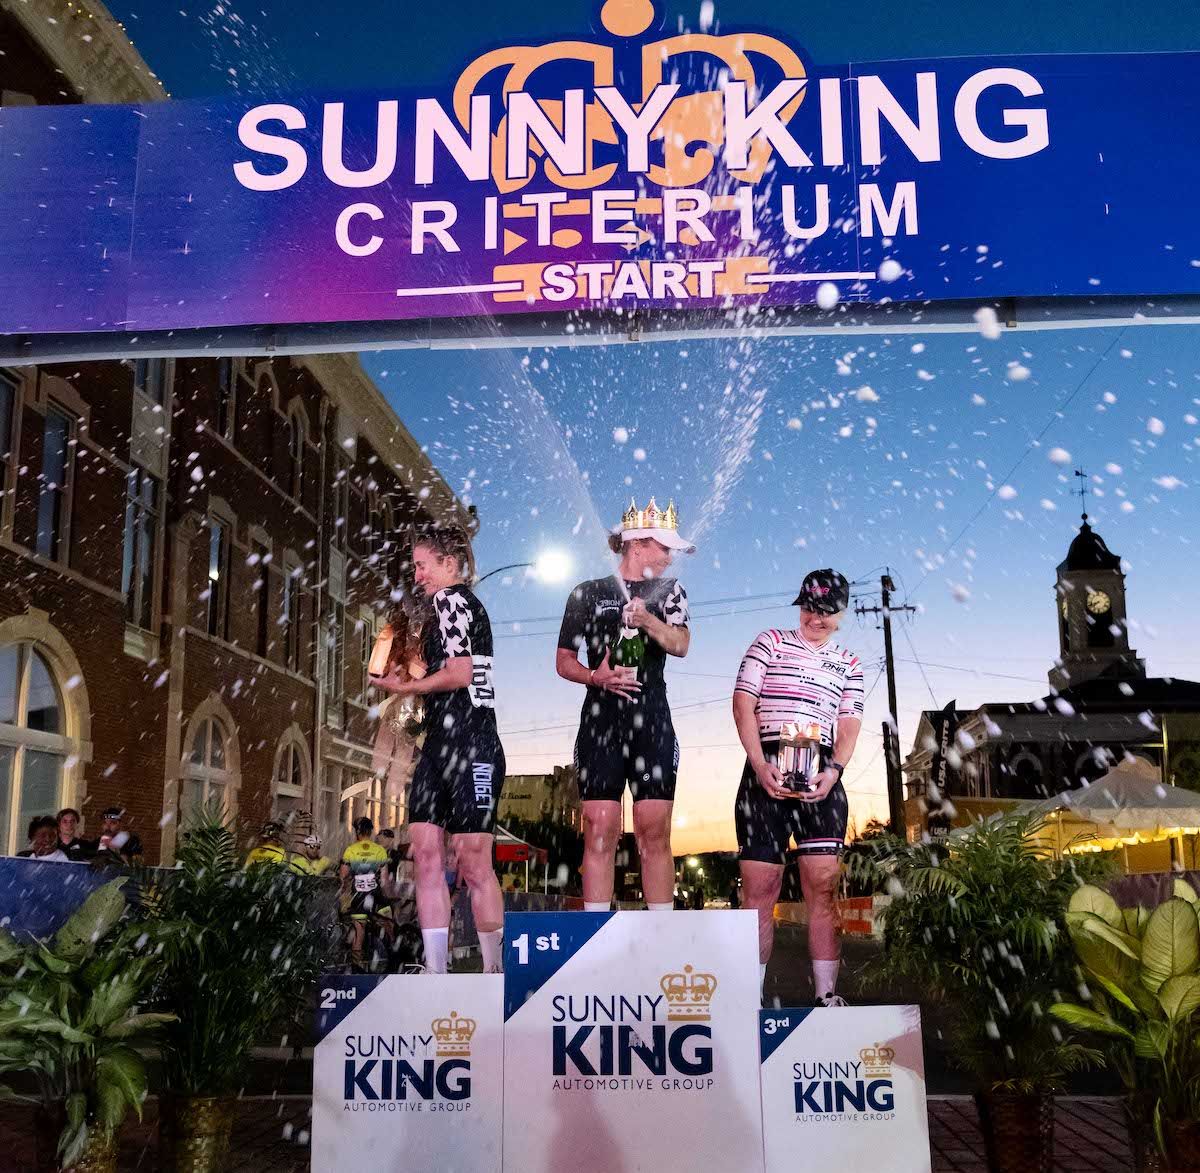 Sunny King Criterium Kendall Ryan and Alfredo Rodriguez win titles in